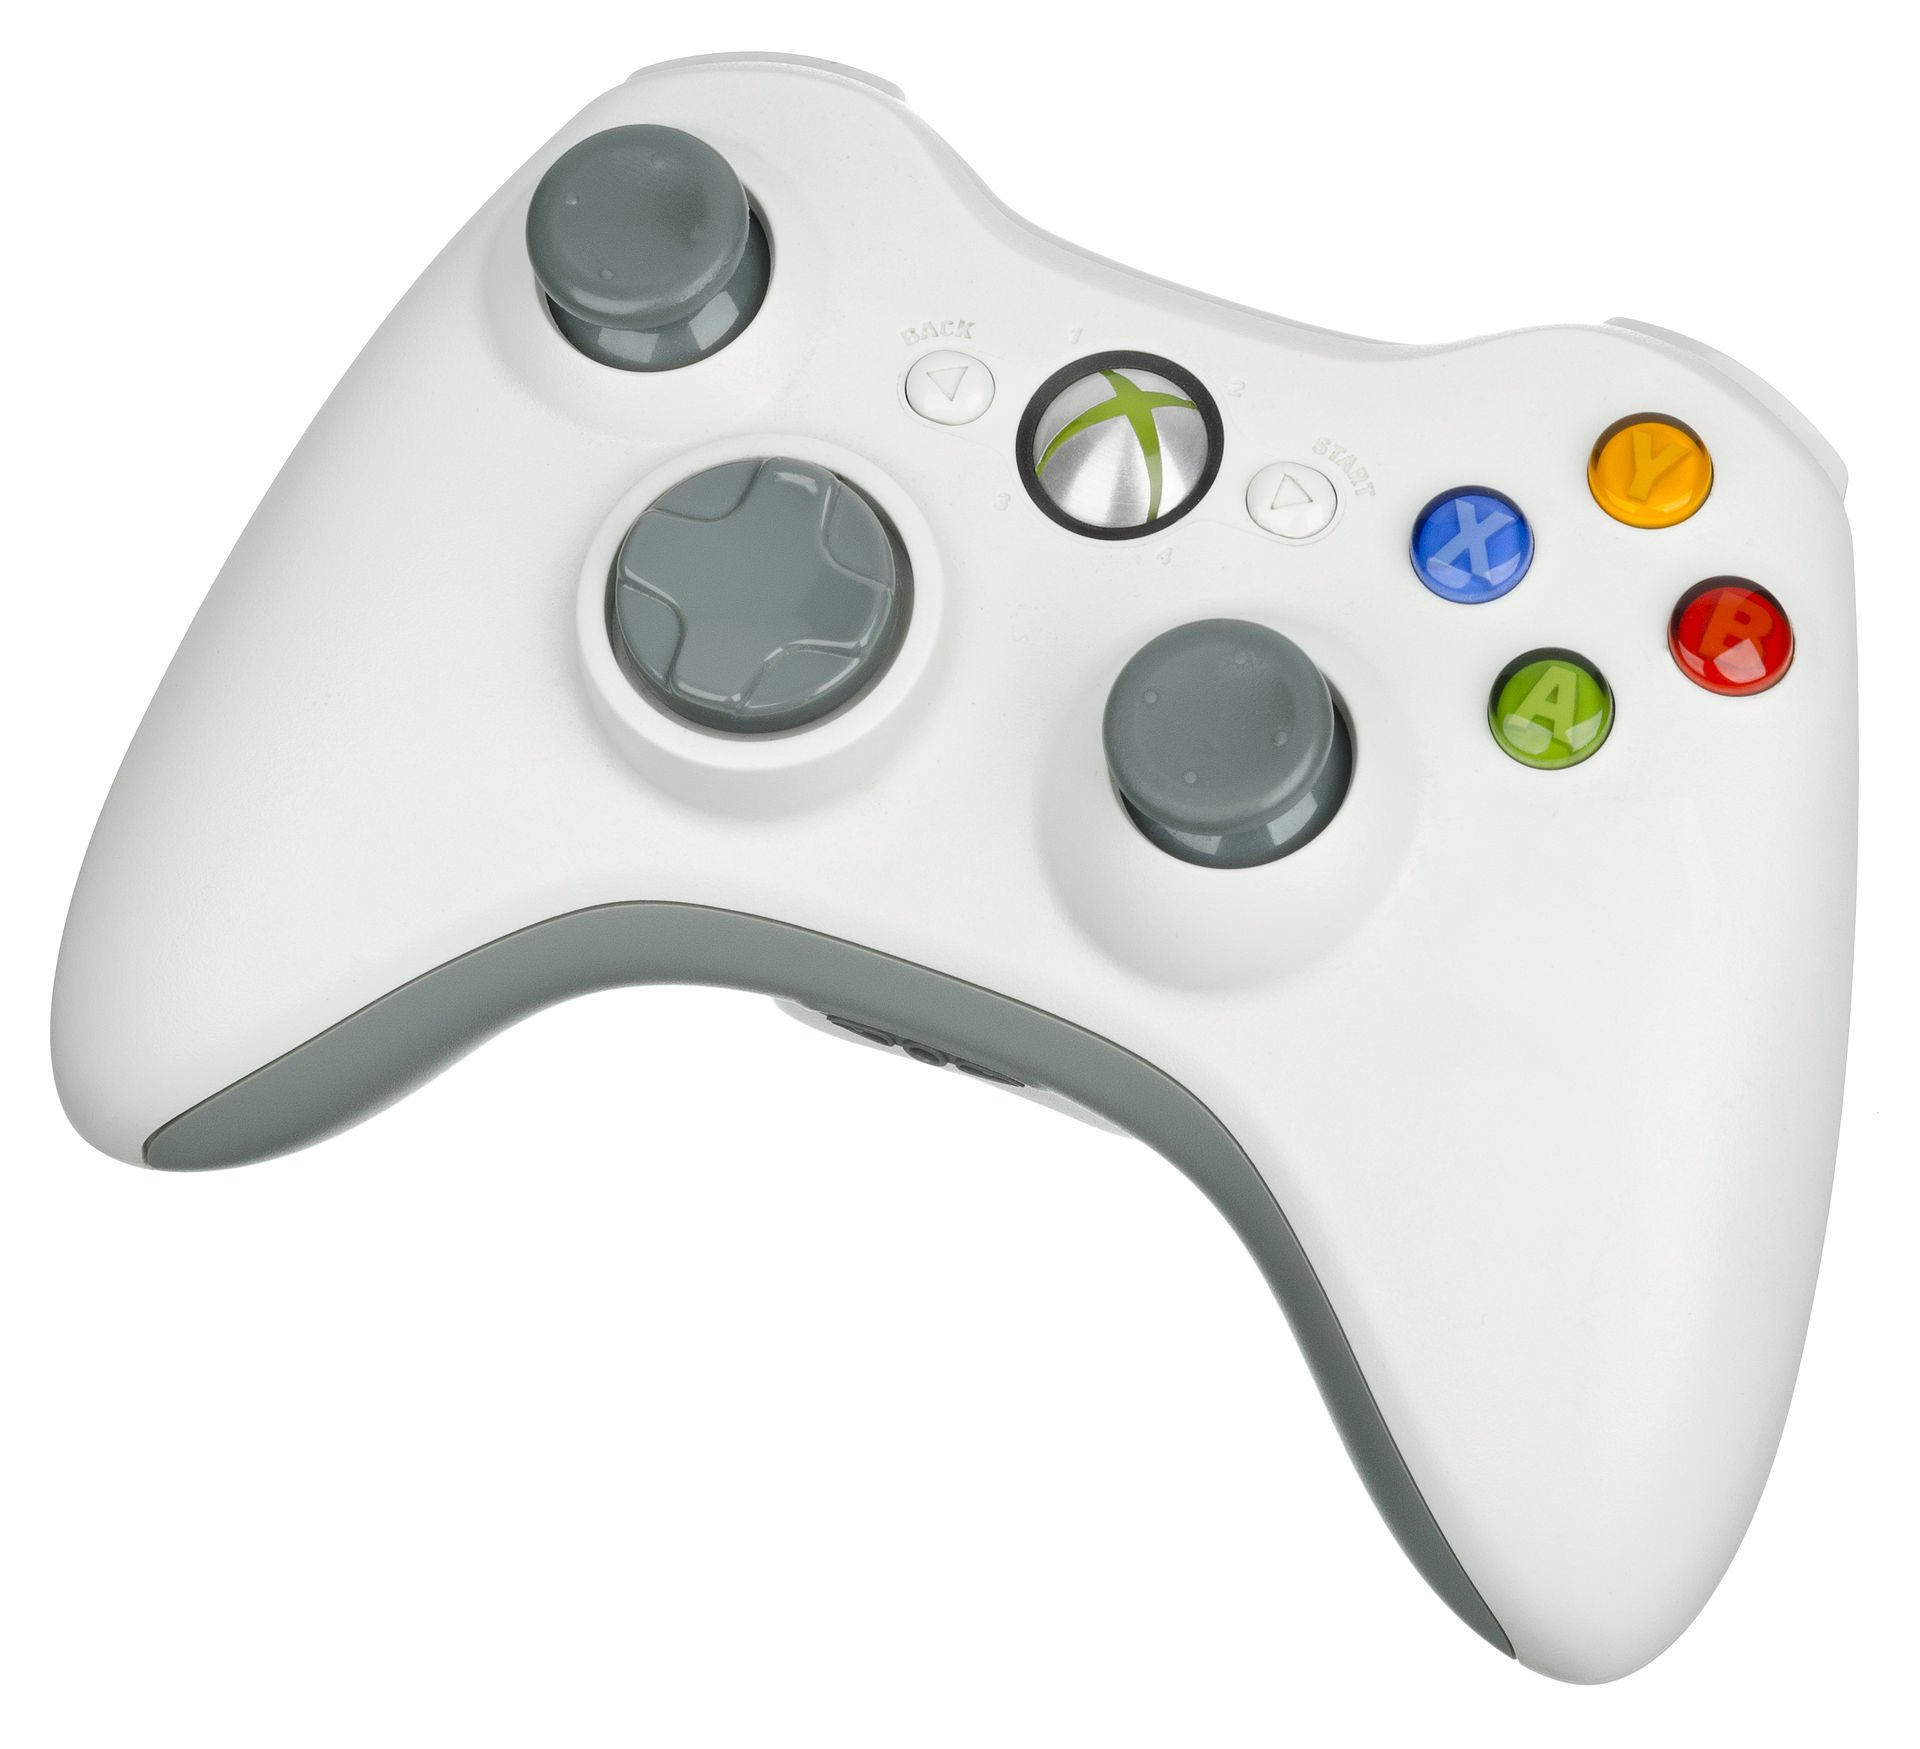 Deliberately Pat die The company that revived the Xbox 'Duke' is now bringing back the Xbox 360  controller | VGC